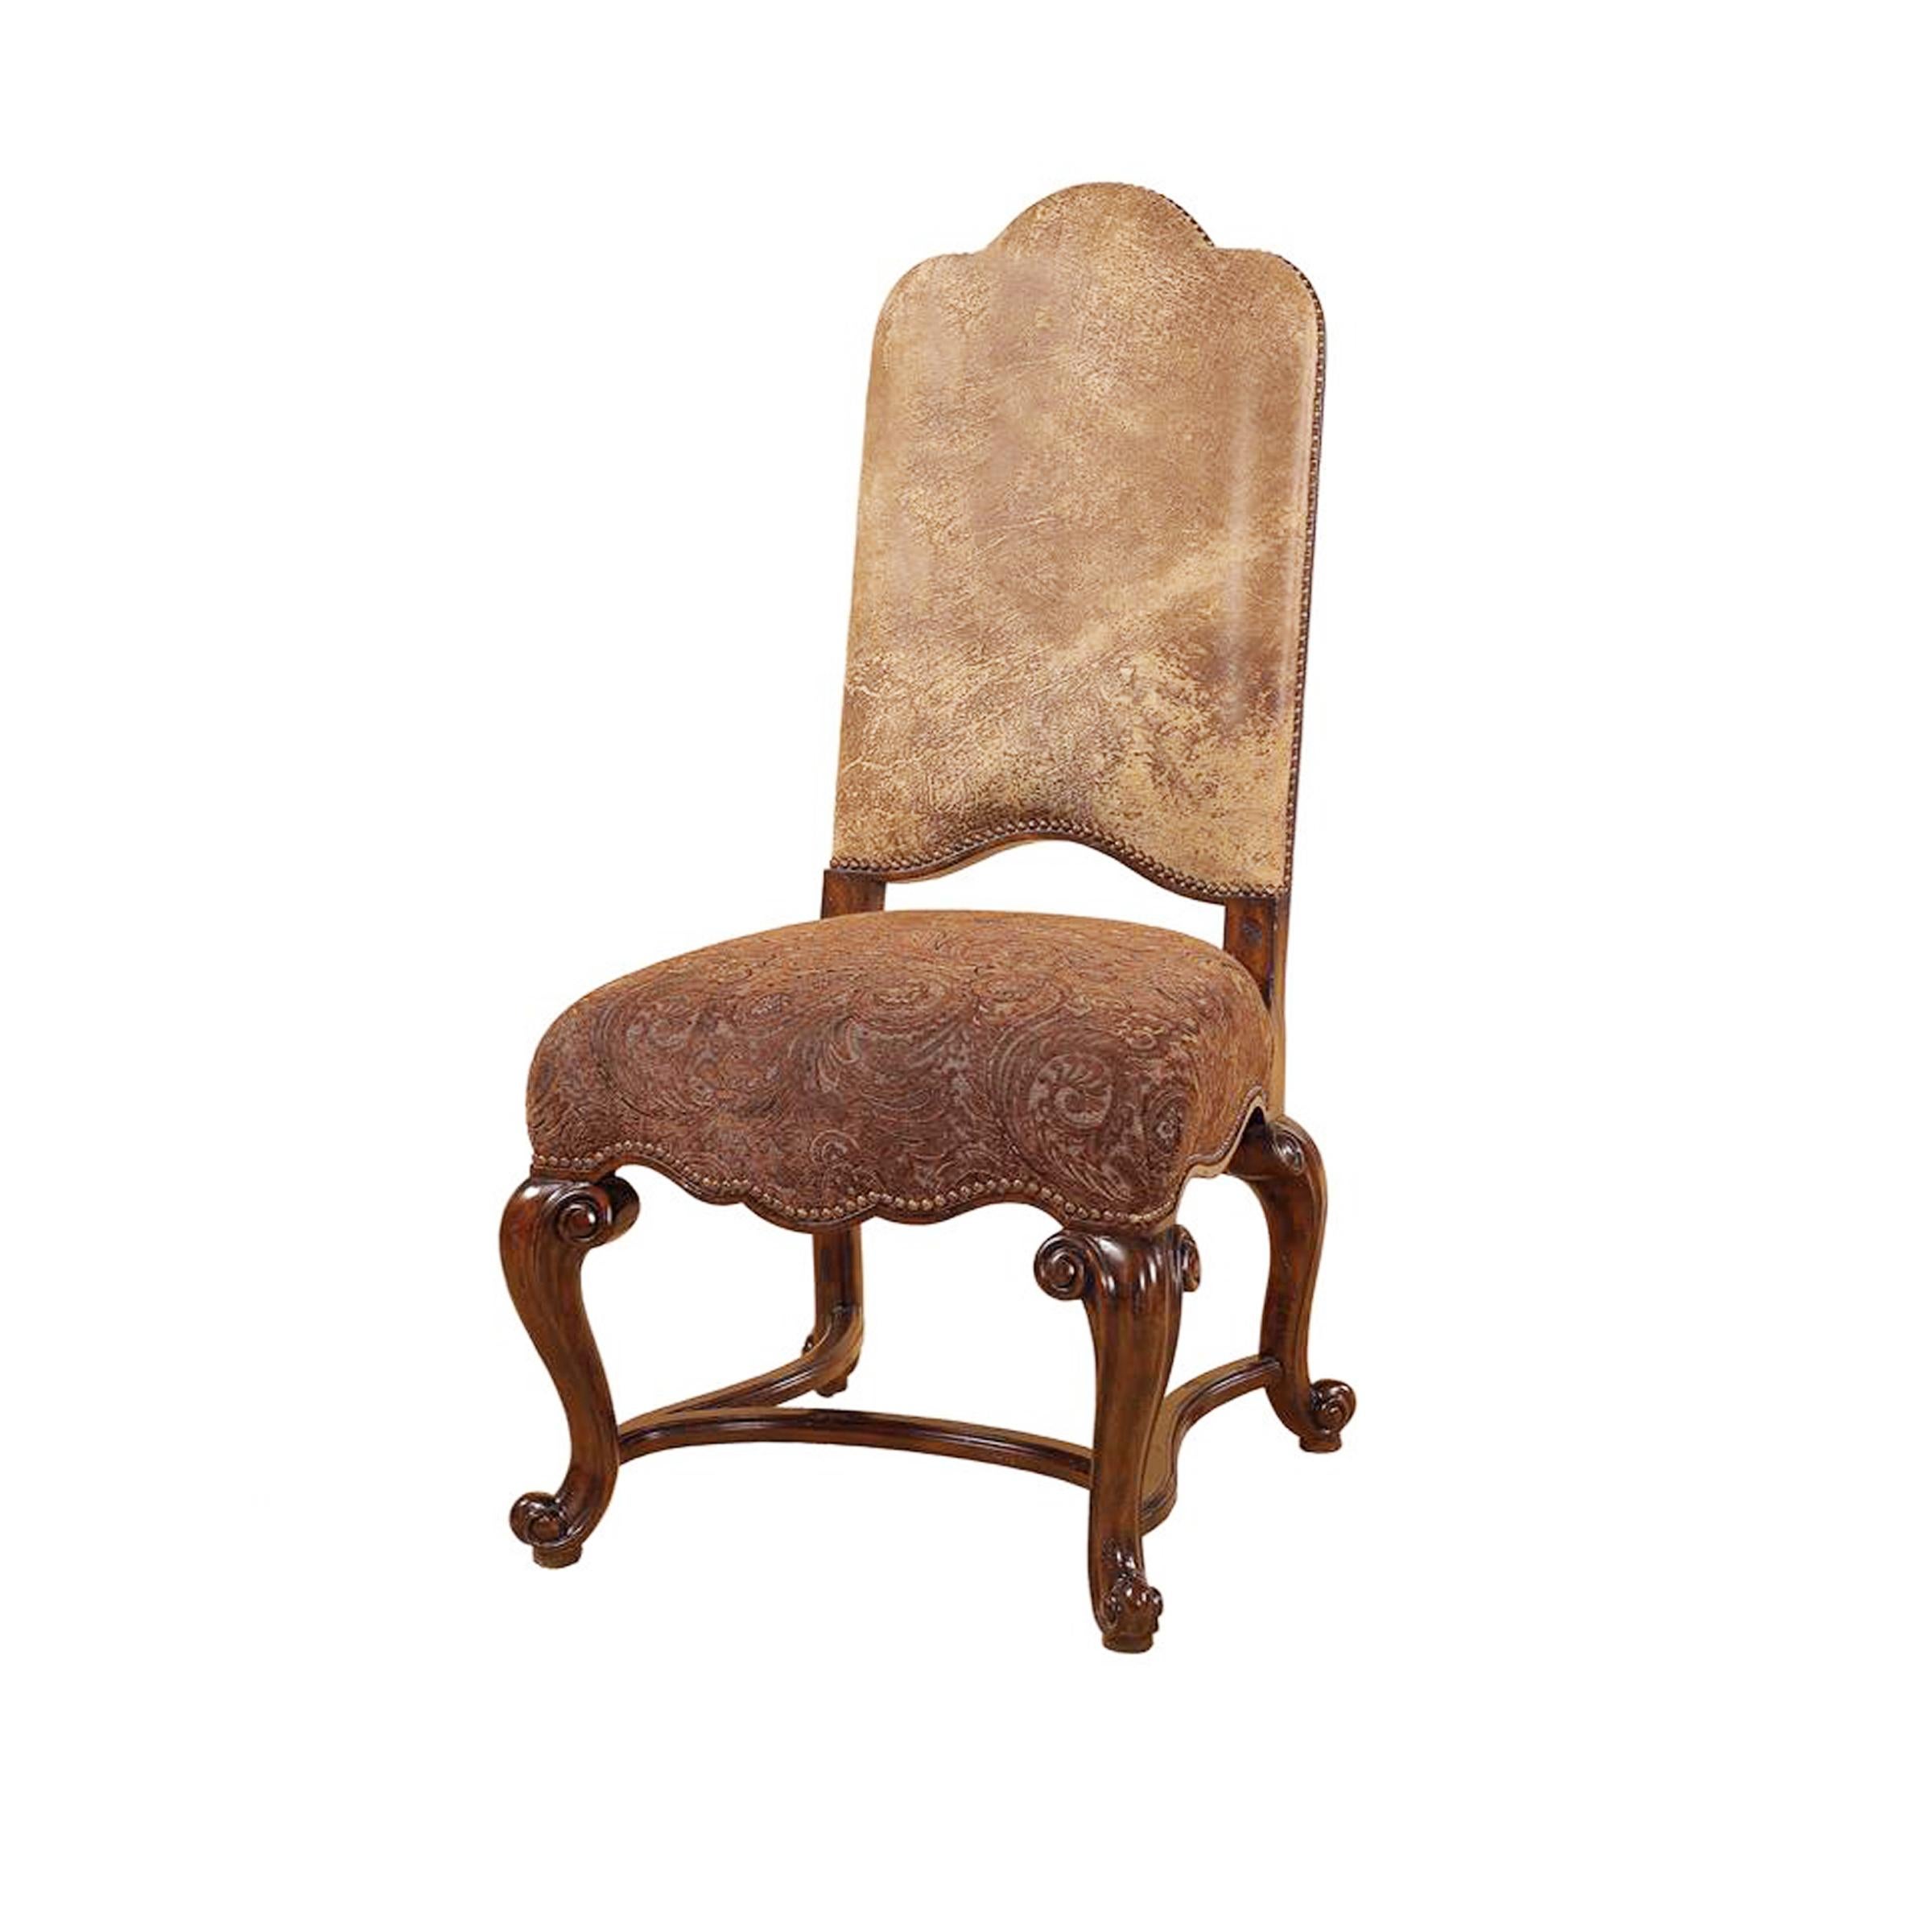 Set of 6 Renaissance Revival Style dining chairs

Suede leather backs with jewel-tone paisley print on the seats. High-end designer grade leather. Brass nail finished antique leather and dark lido finish. Camel back and cabriole legs with full